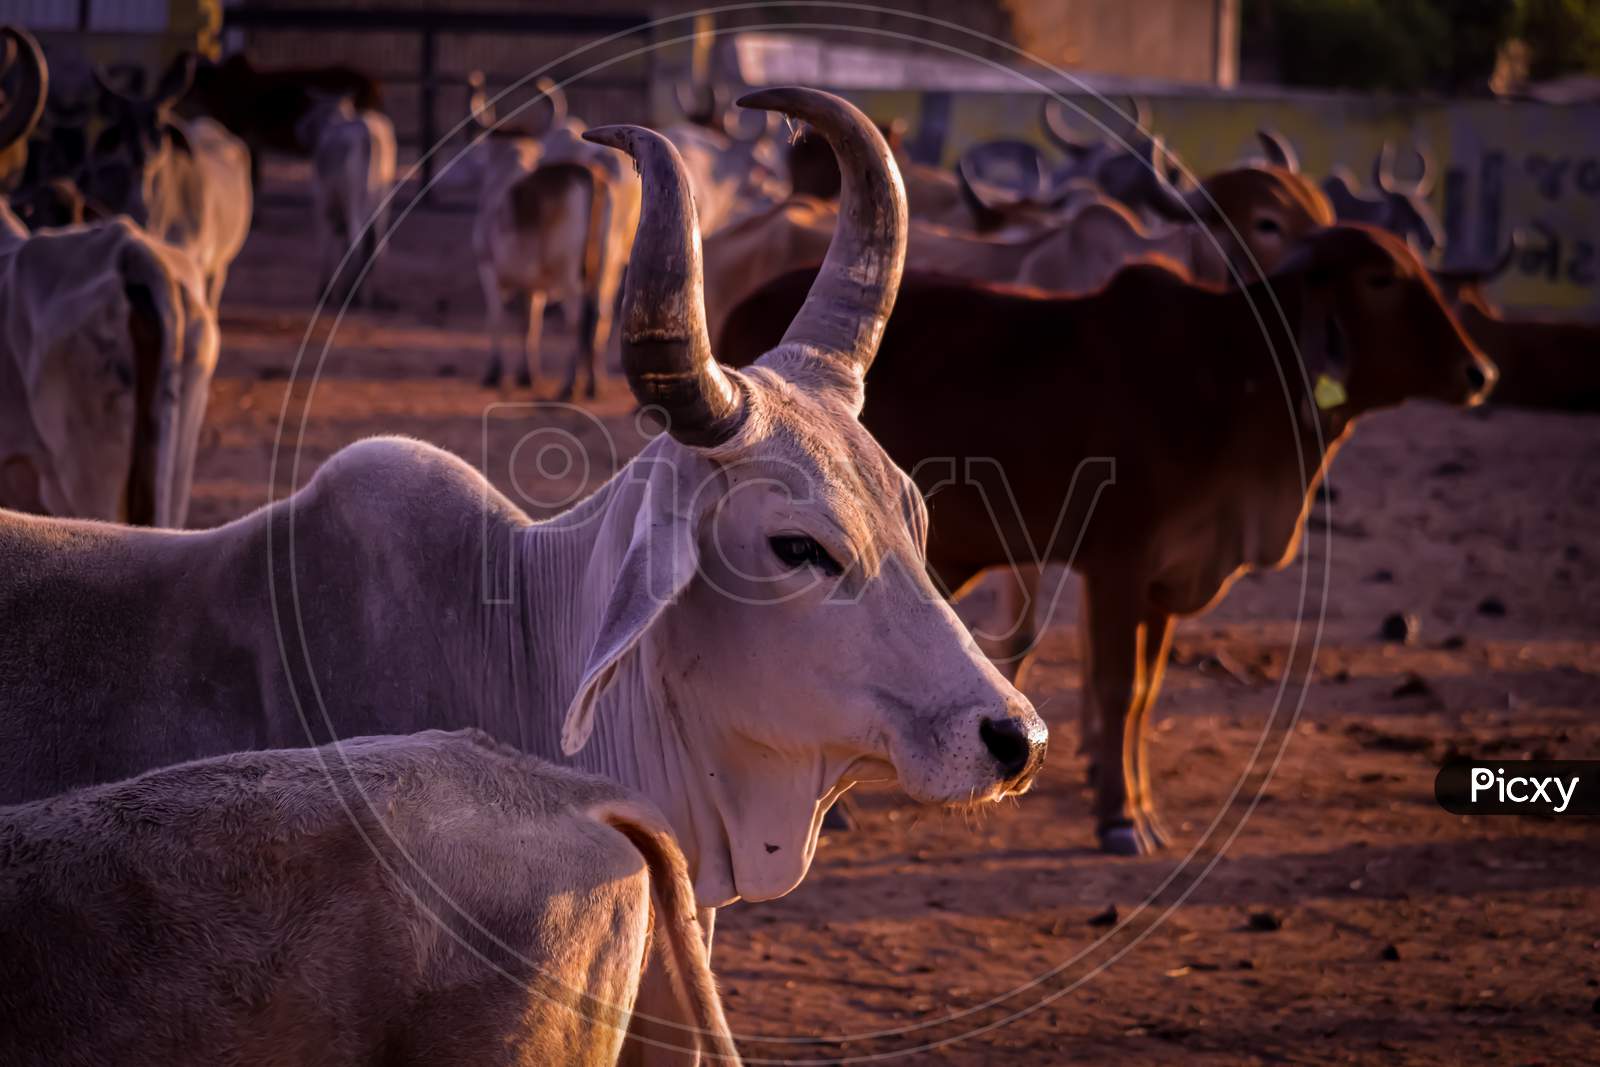 Image Of Indian Cows In The Village Of Rajasthan India,Indian Cows In Cow Farm,Cows Resting In A Field, Protective Shelters For Cows In Govshal,Selective Focus